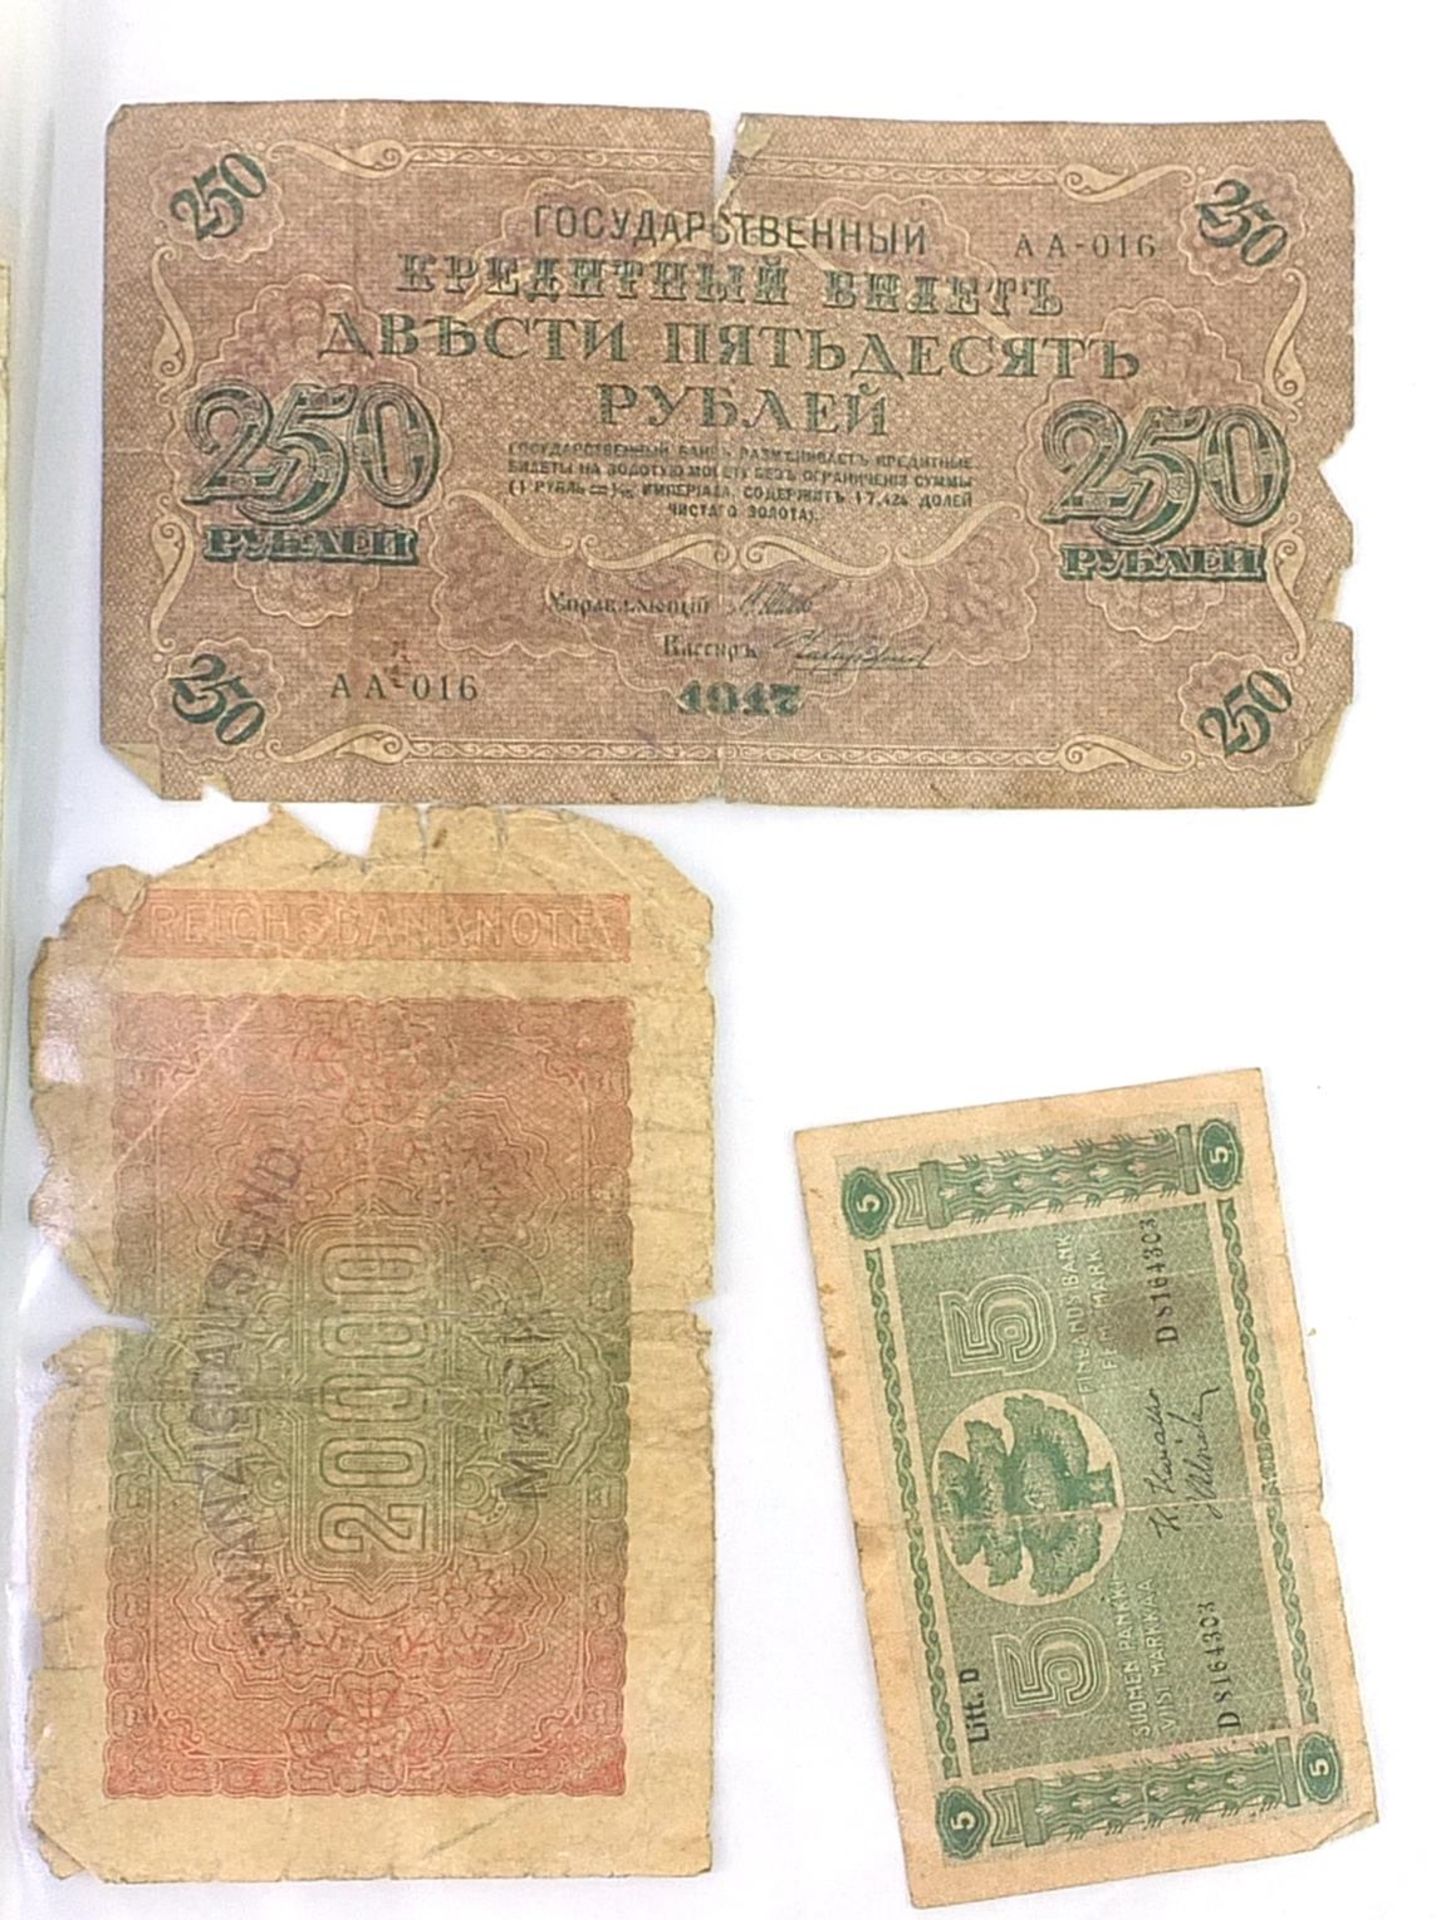 World banknotes including German and Russian examples - Image 11 of 16